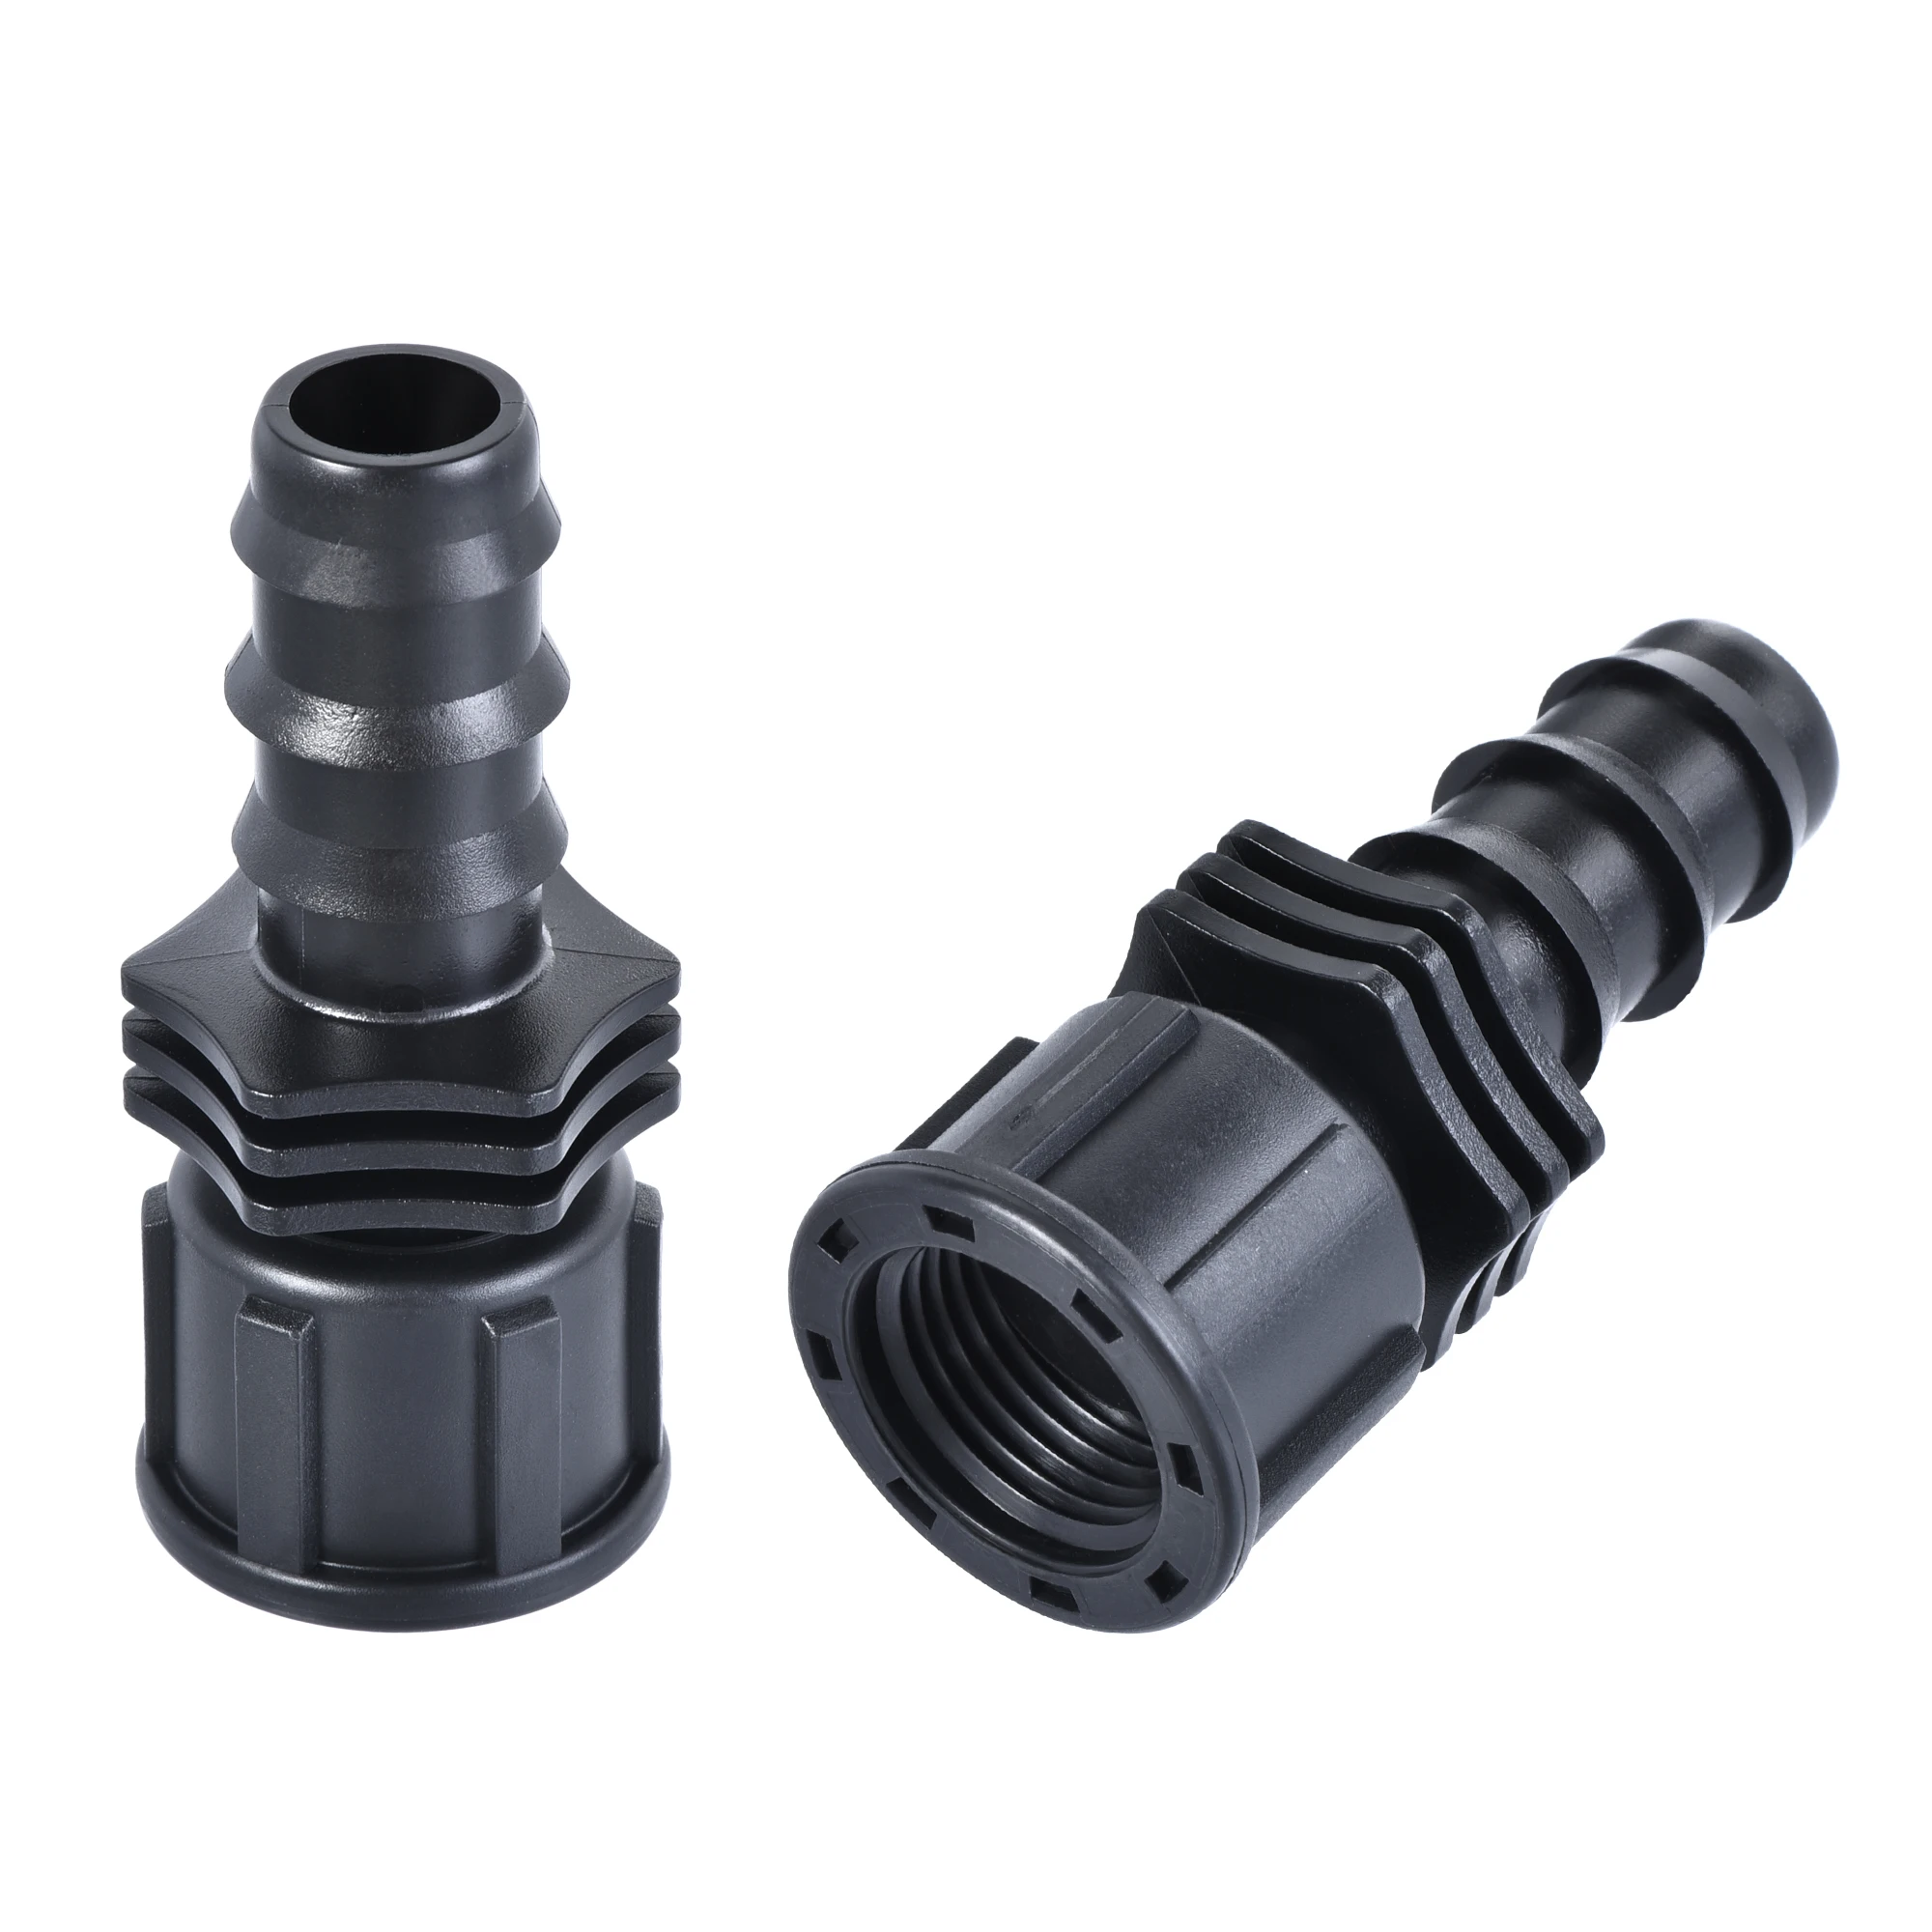 

Uxcell ABS Hose Barb Fitting Coupler 16mm Barb G1/2 Female Thread Black 2Pcs